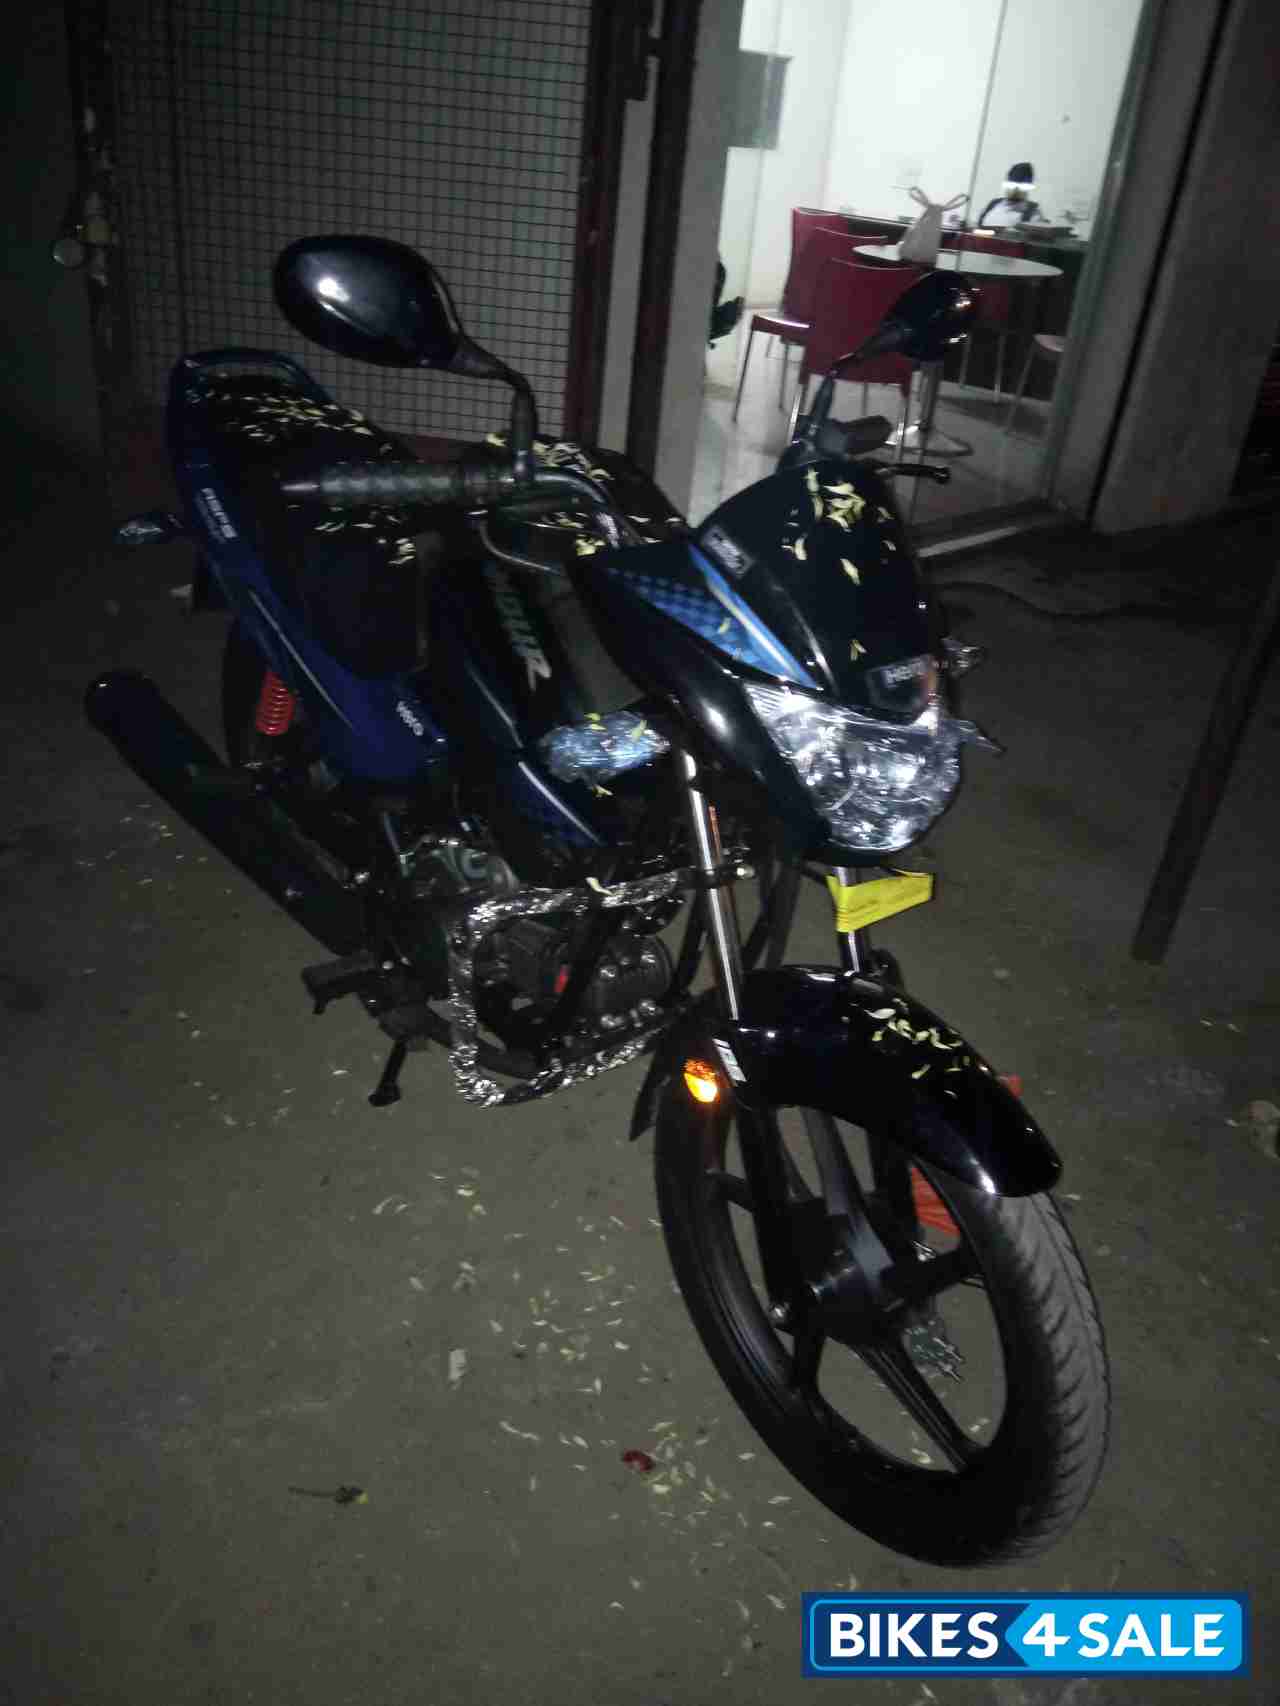 Used 2019 Model Hero Glamour 125 For Sale In Medchal Id 250762